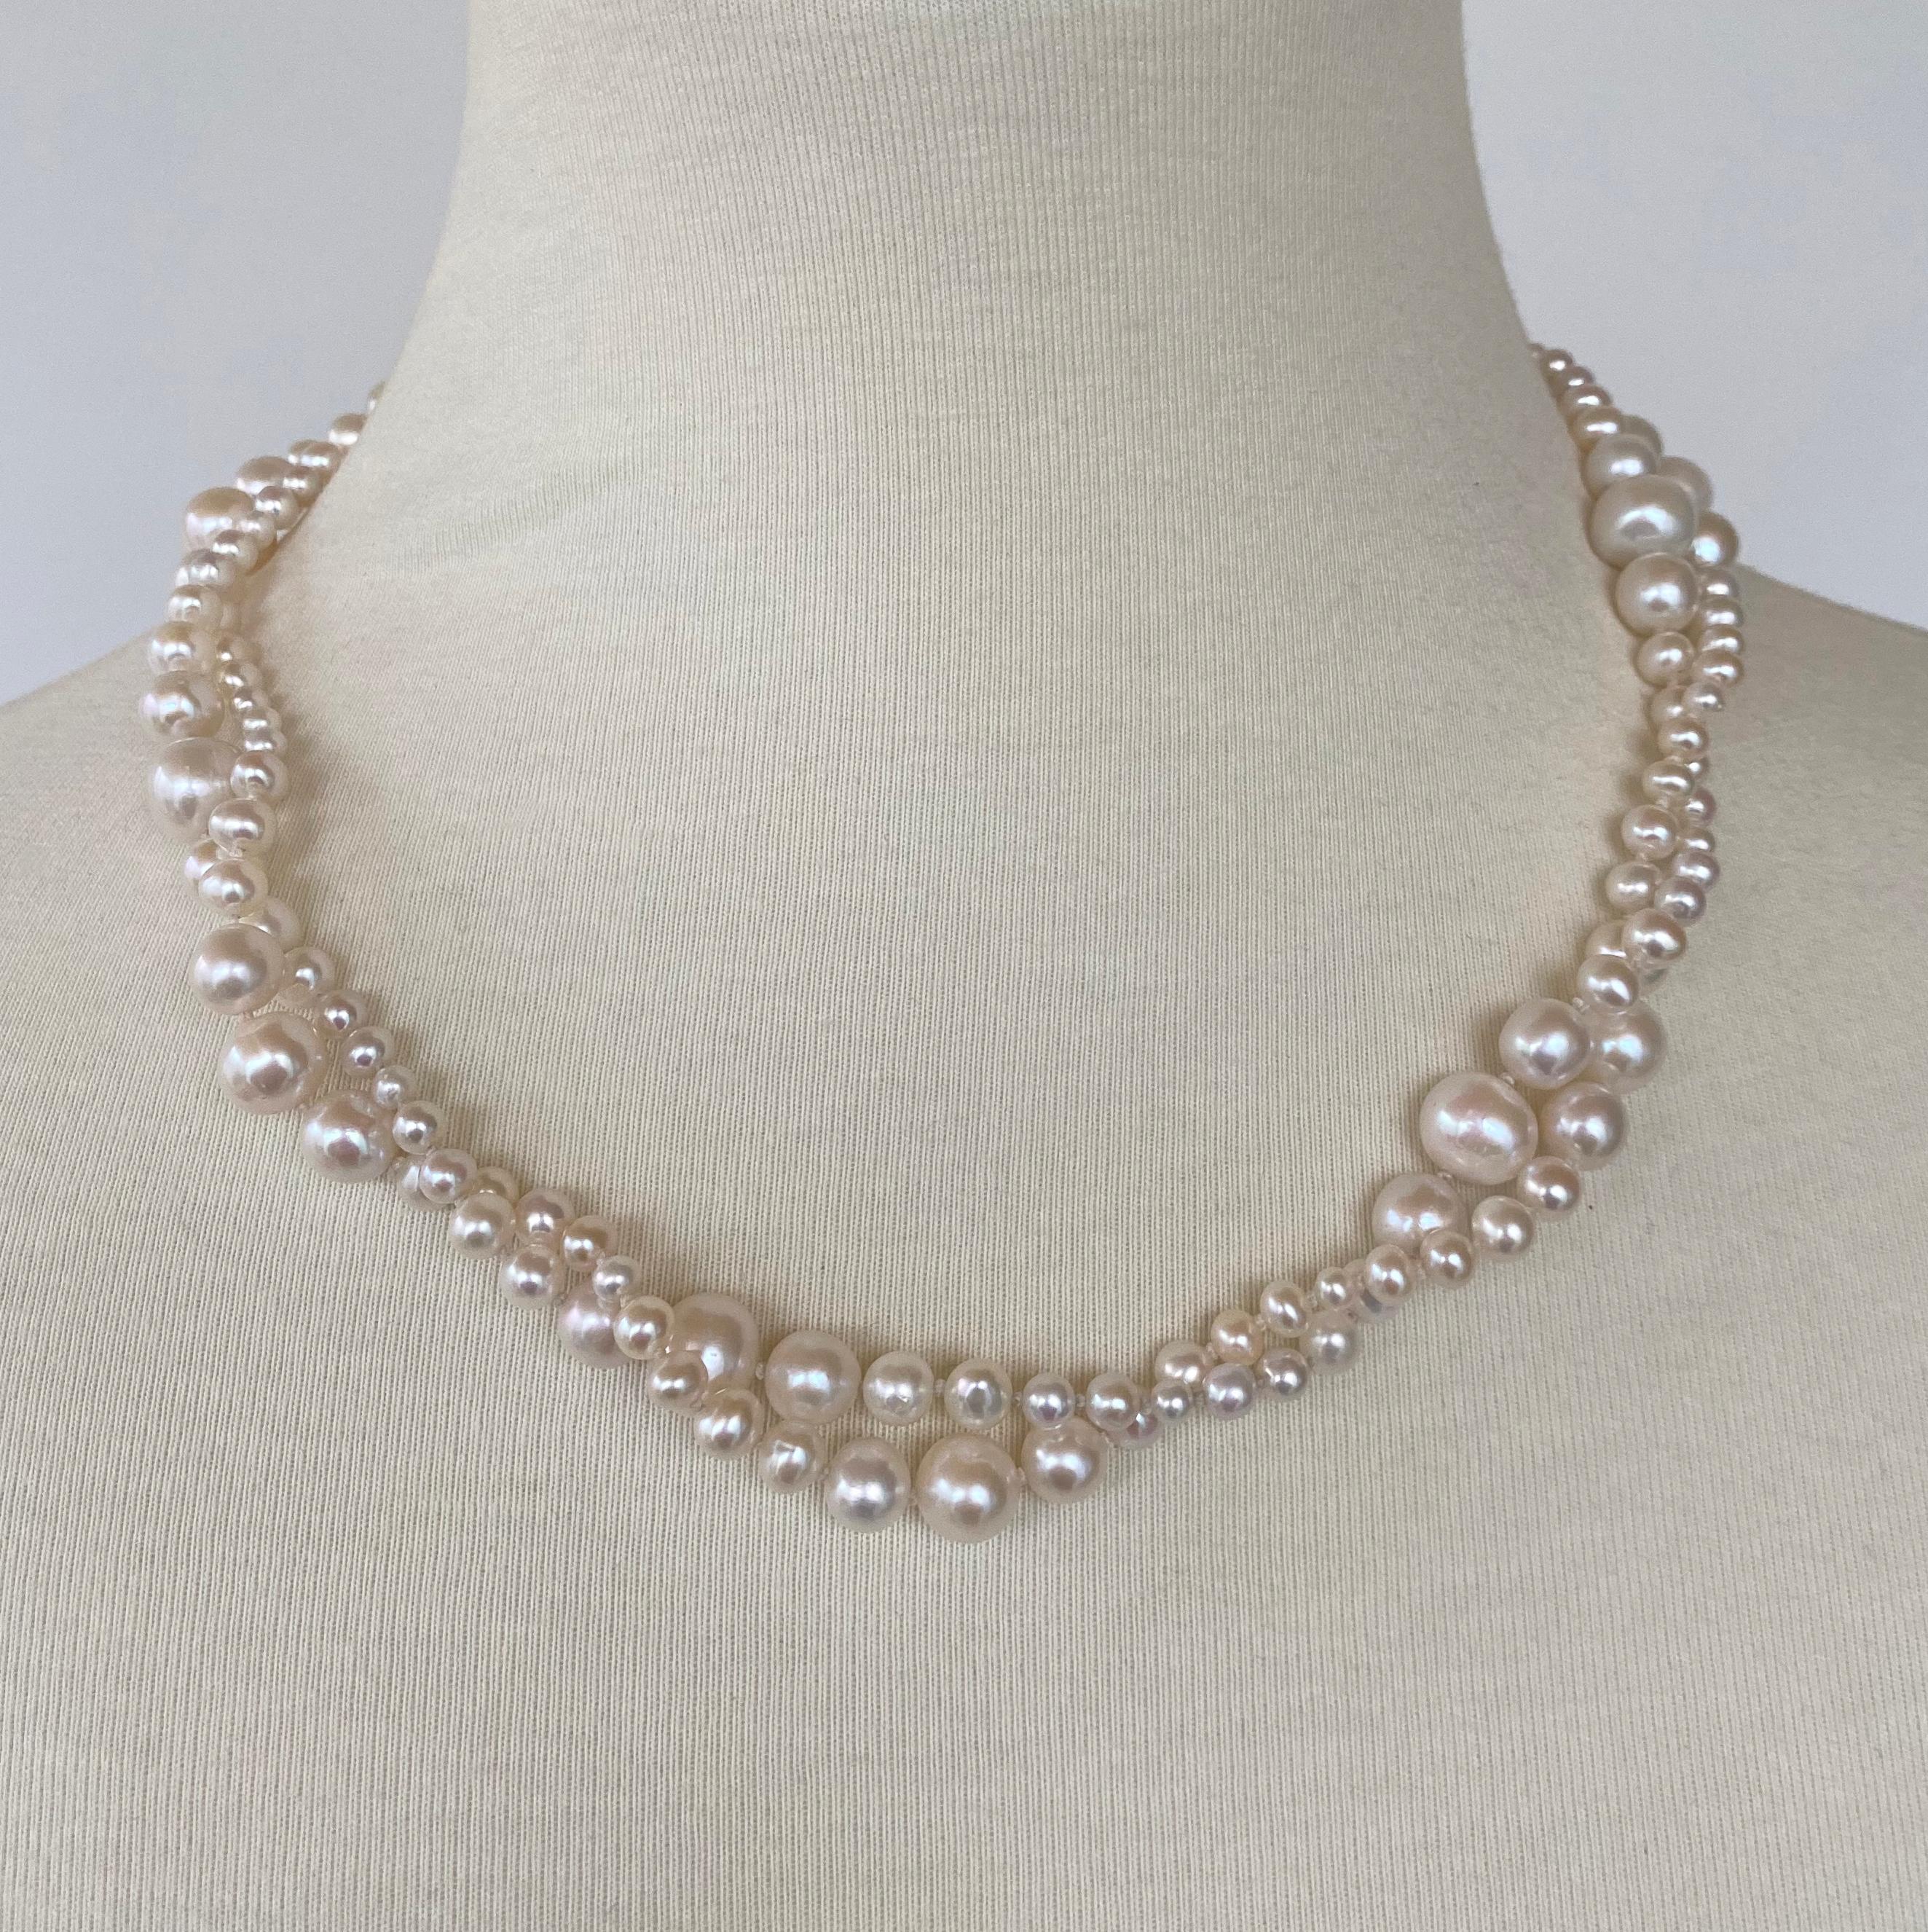 Gorgeous Graduated Pearl strung necklace designed by Marina J. This piece features all round Cultured Pearls displaying a vivid white color and soft luster. This wonderful piece is strung with multiple graduations, giving a contemporary feel to a